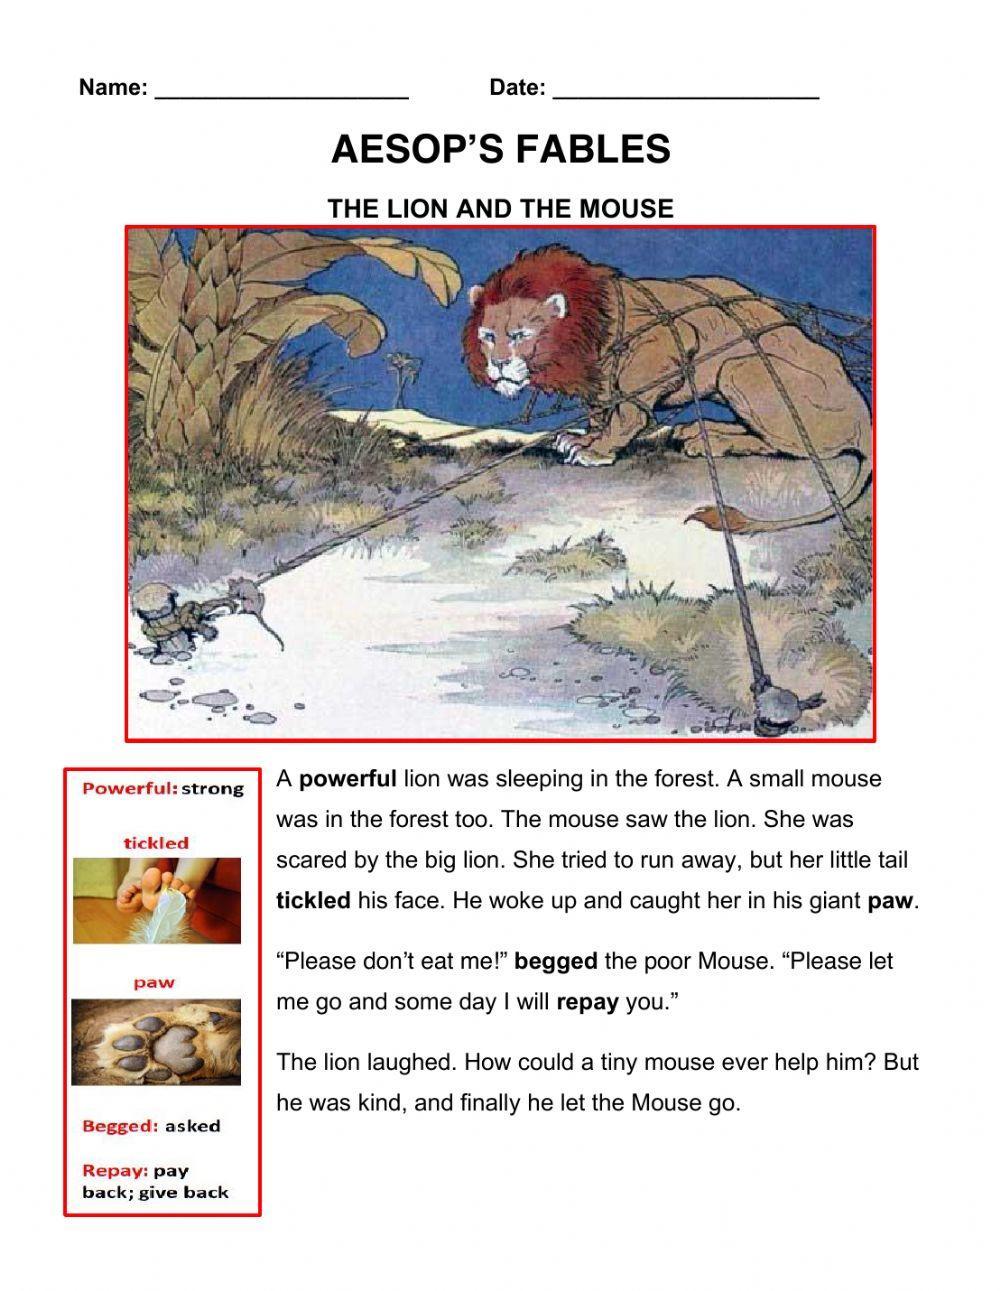 Aesop's Fables: The lion and the mouse